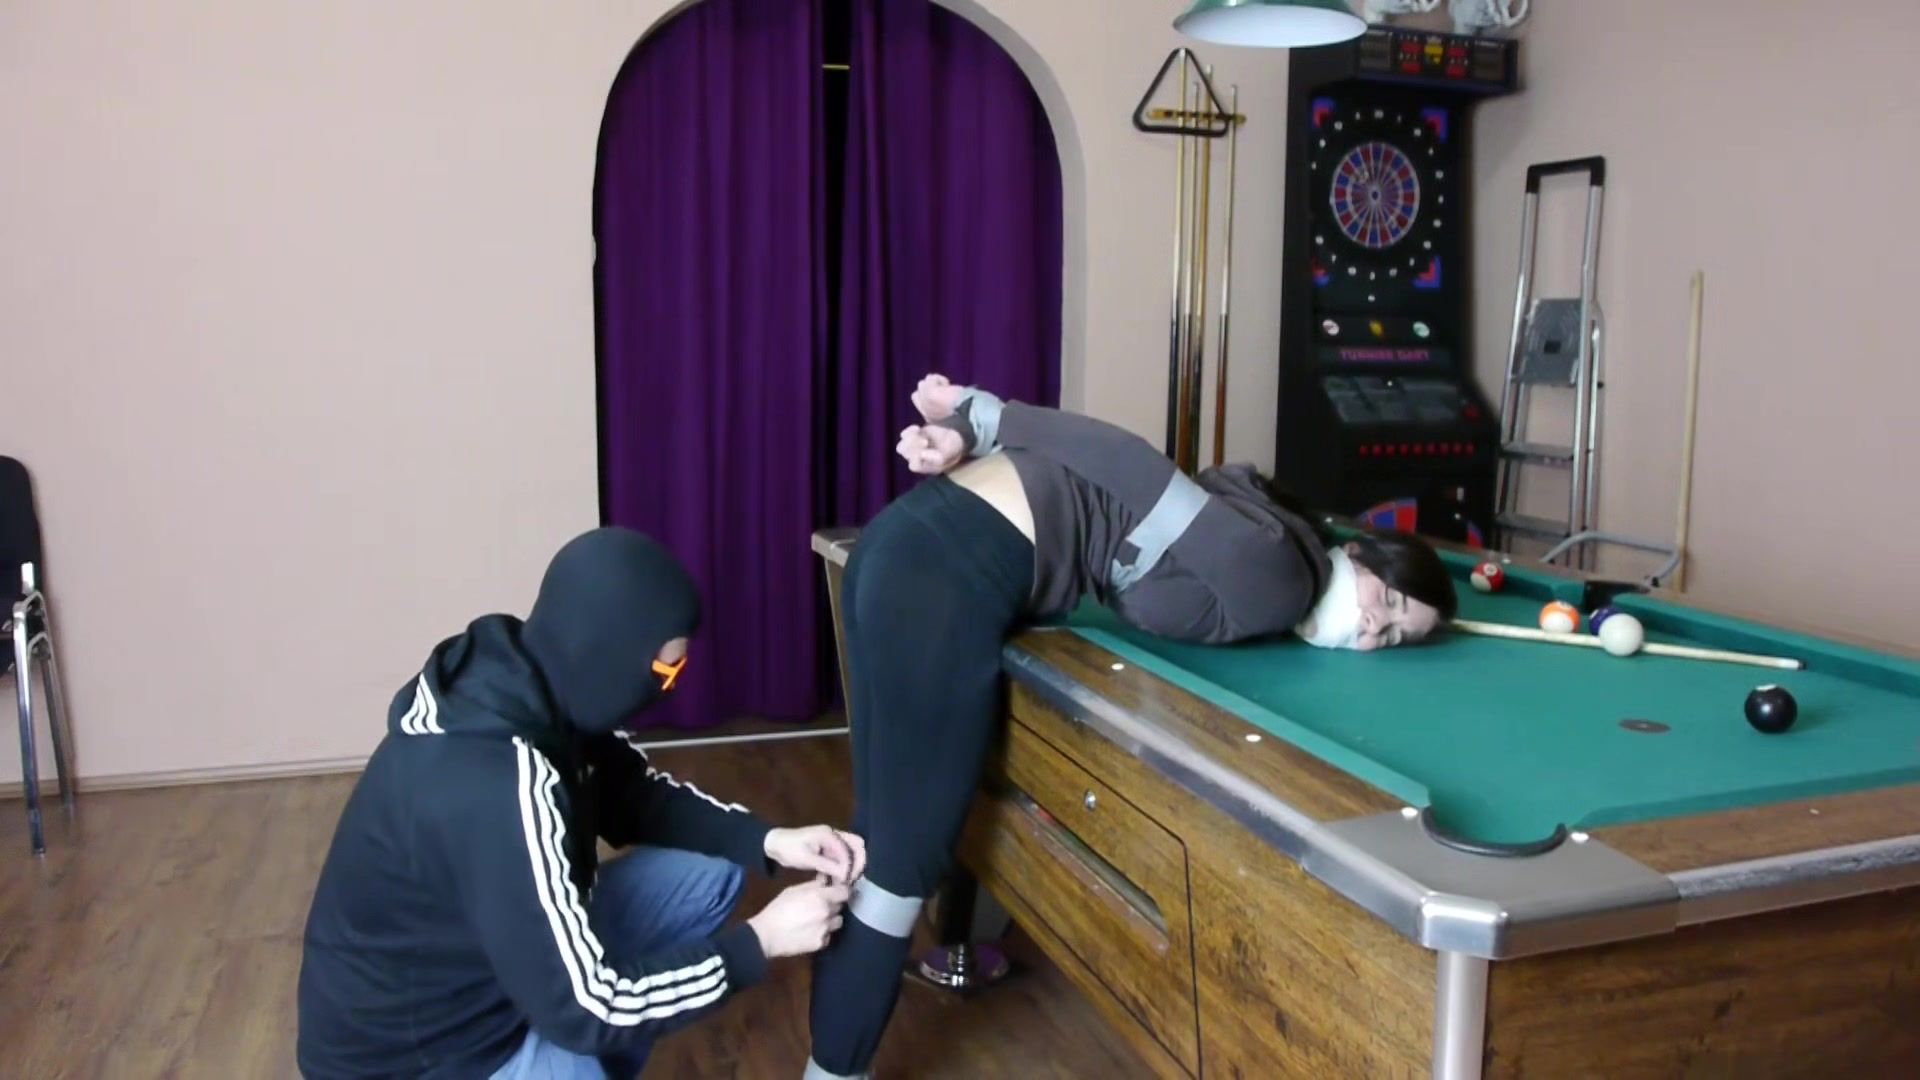 Assfucking Tara Bound And Gagged On Pool Table Sexier